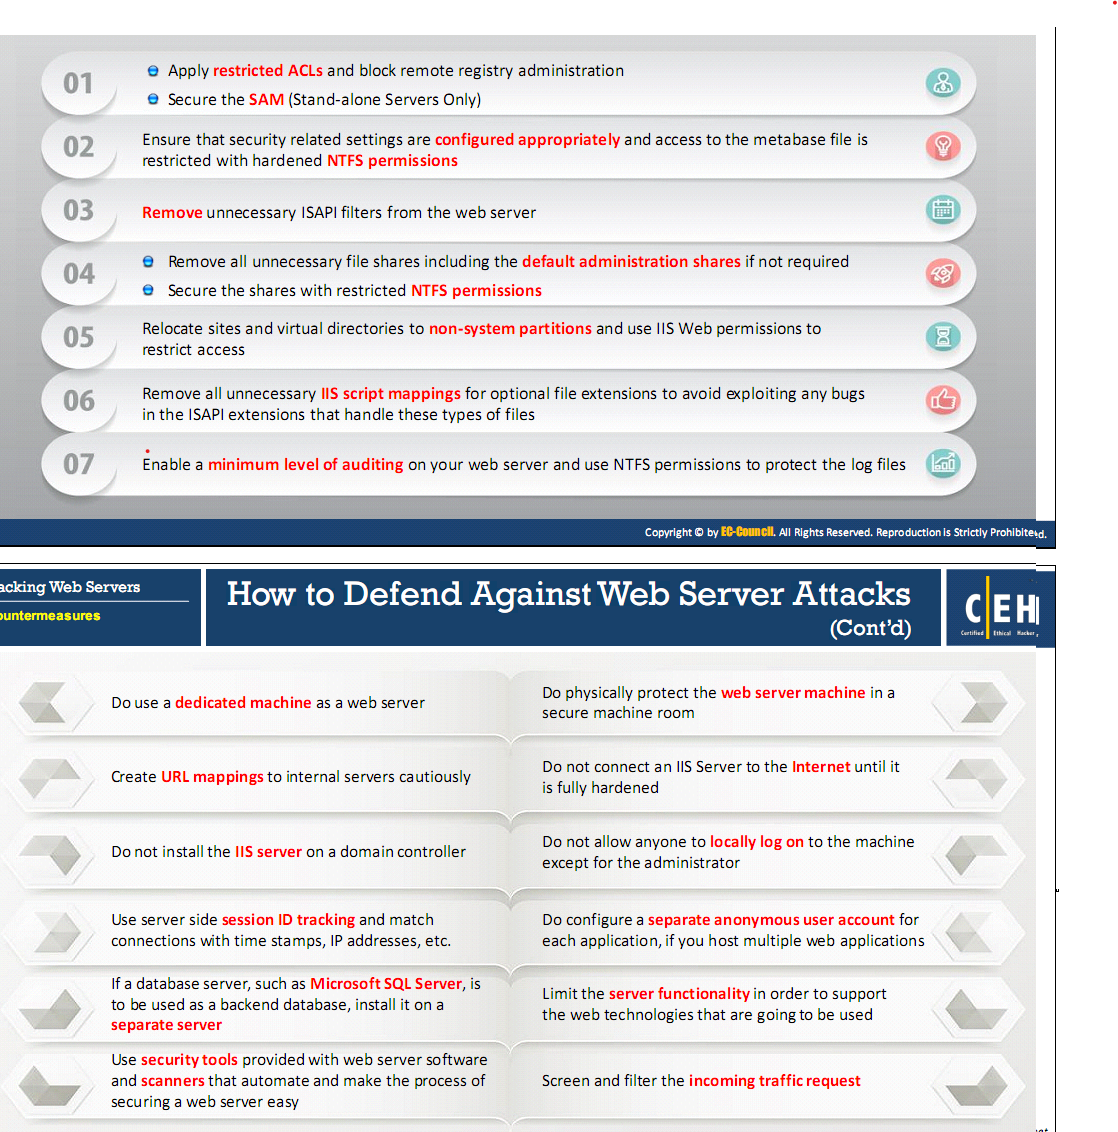 How to Defend Against Web Server Attacks 2